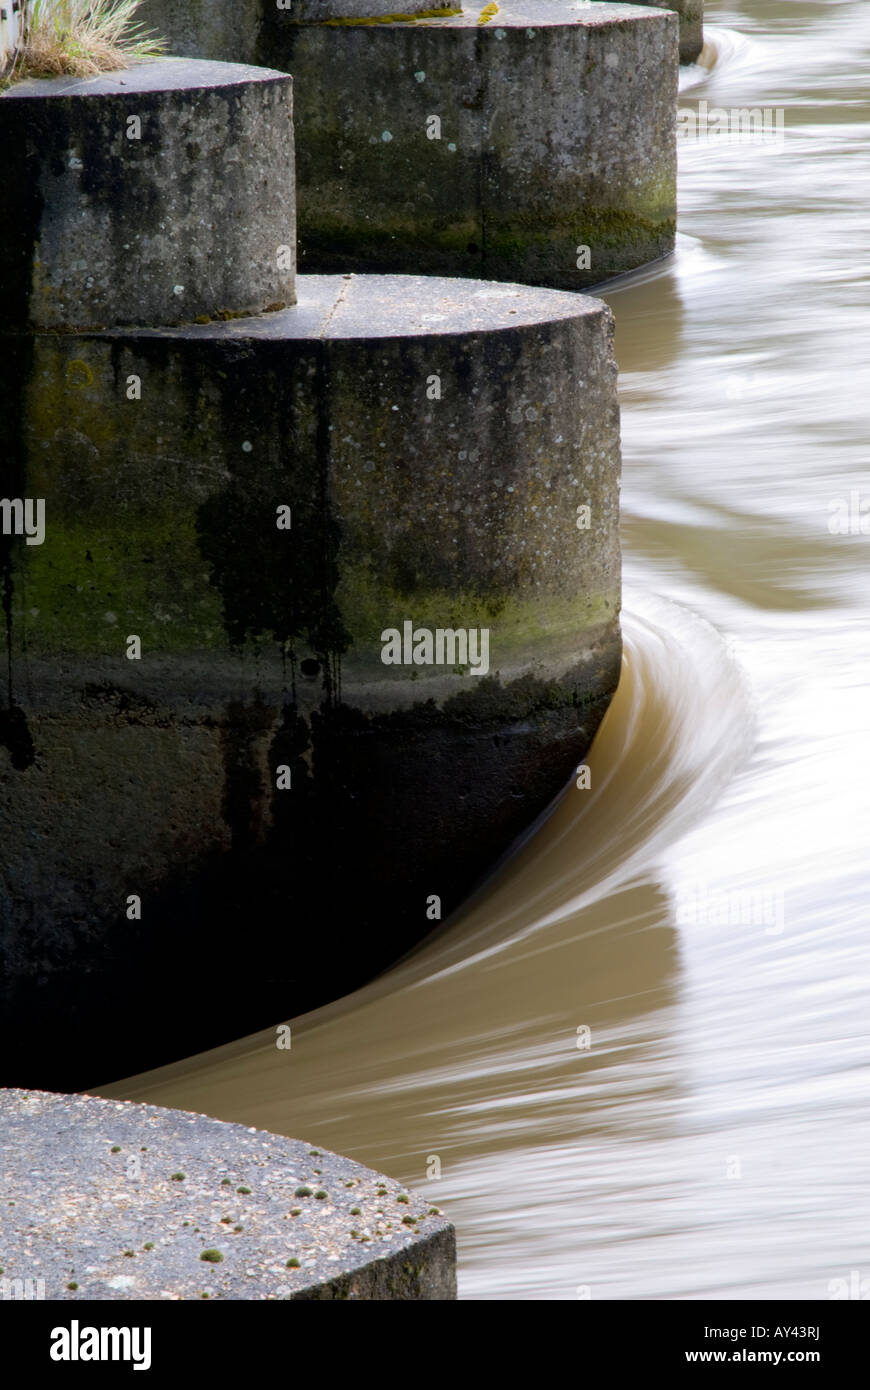 europe uk england river thames water flow Stock Photo